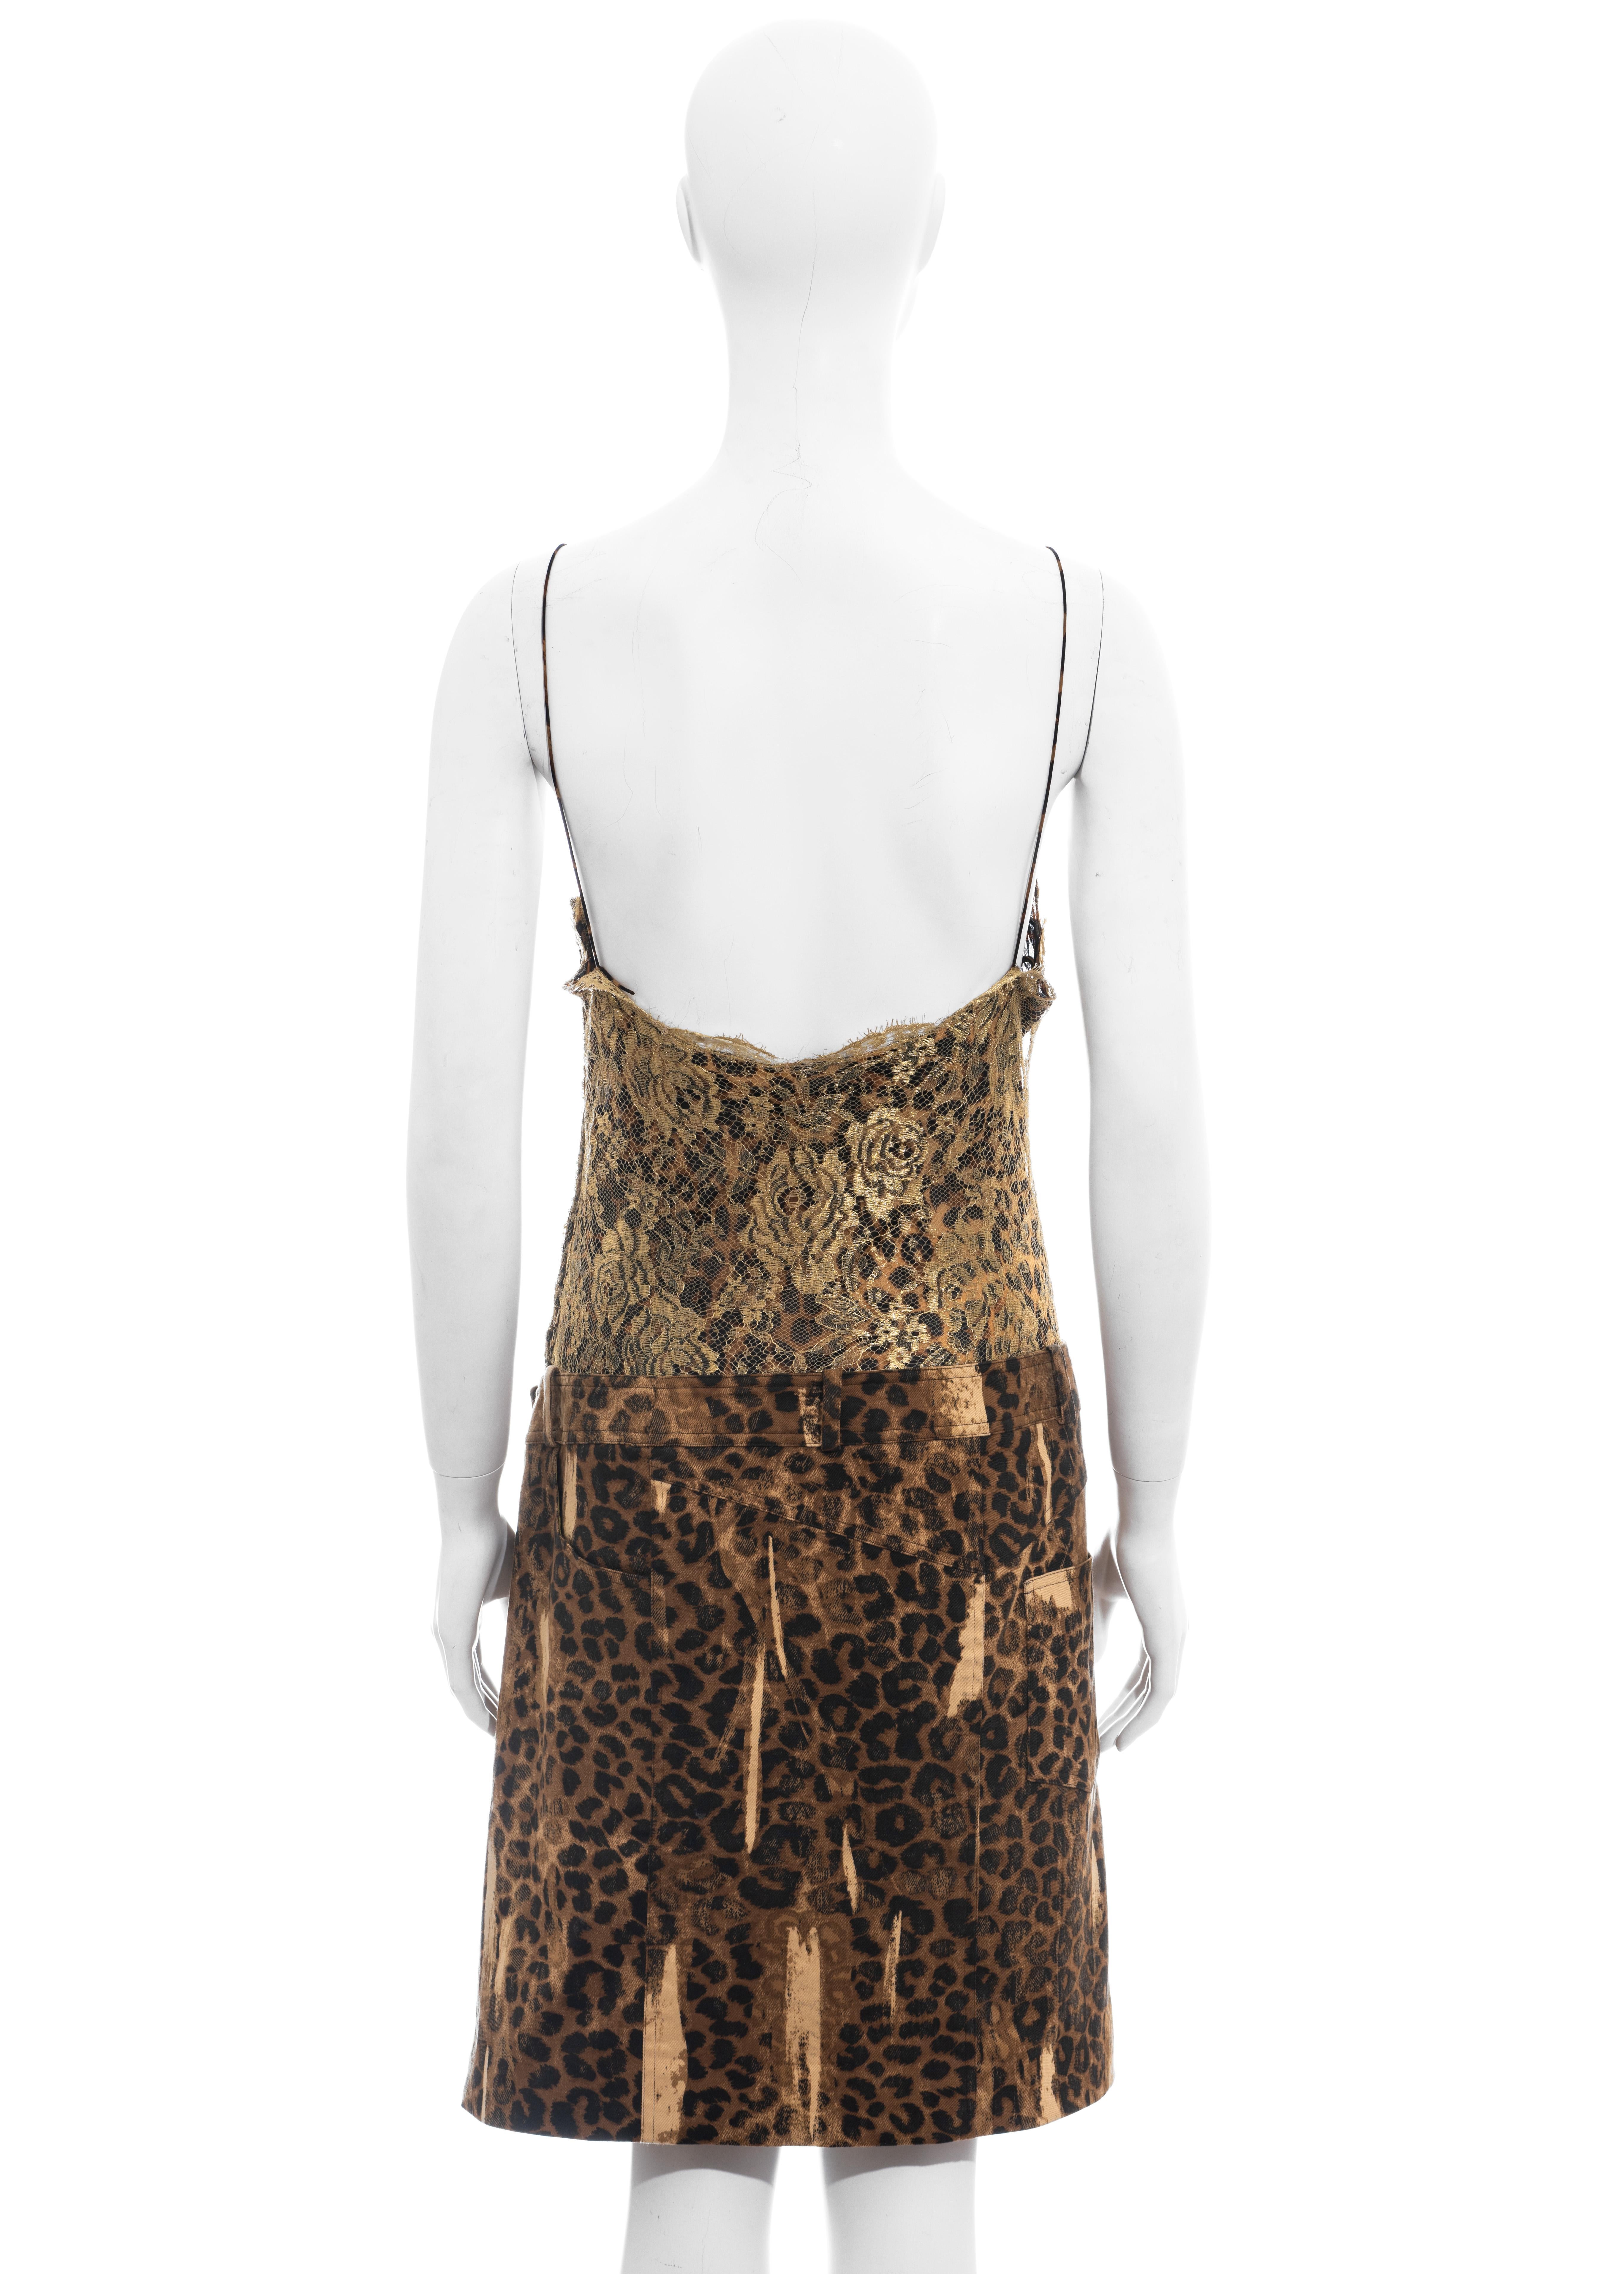 Women's Christian Dior by John Galliano gold lace and leopard print silk dress, fw 2000 For Sale